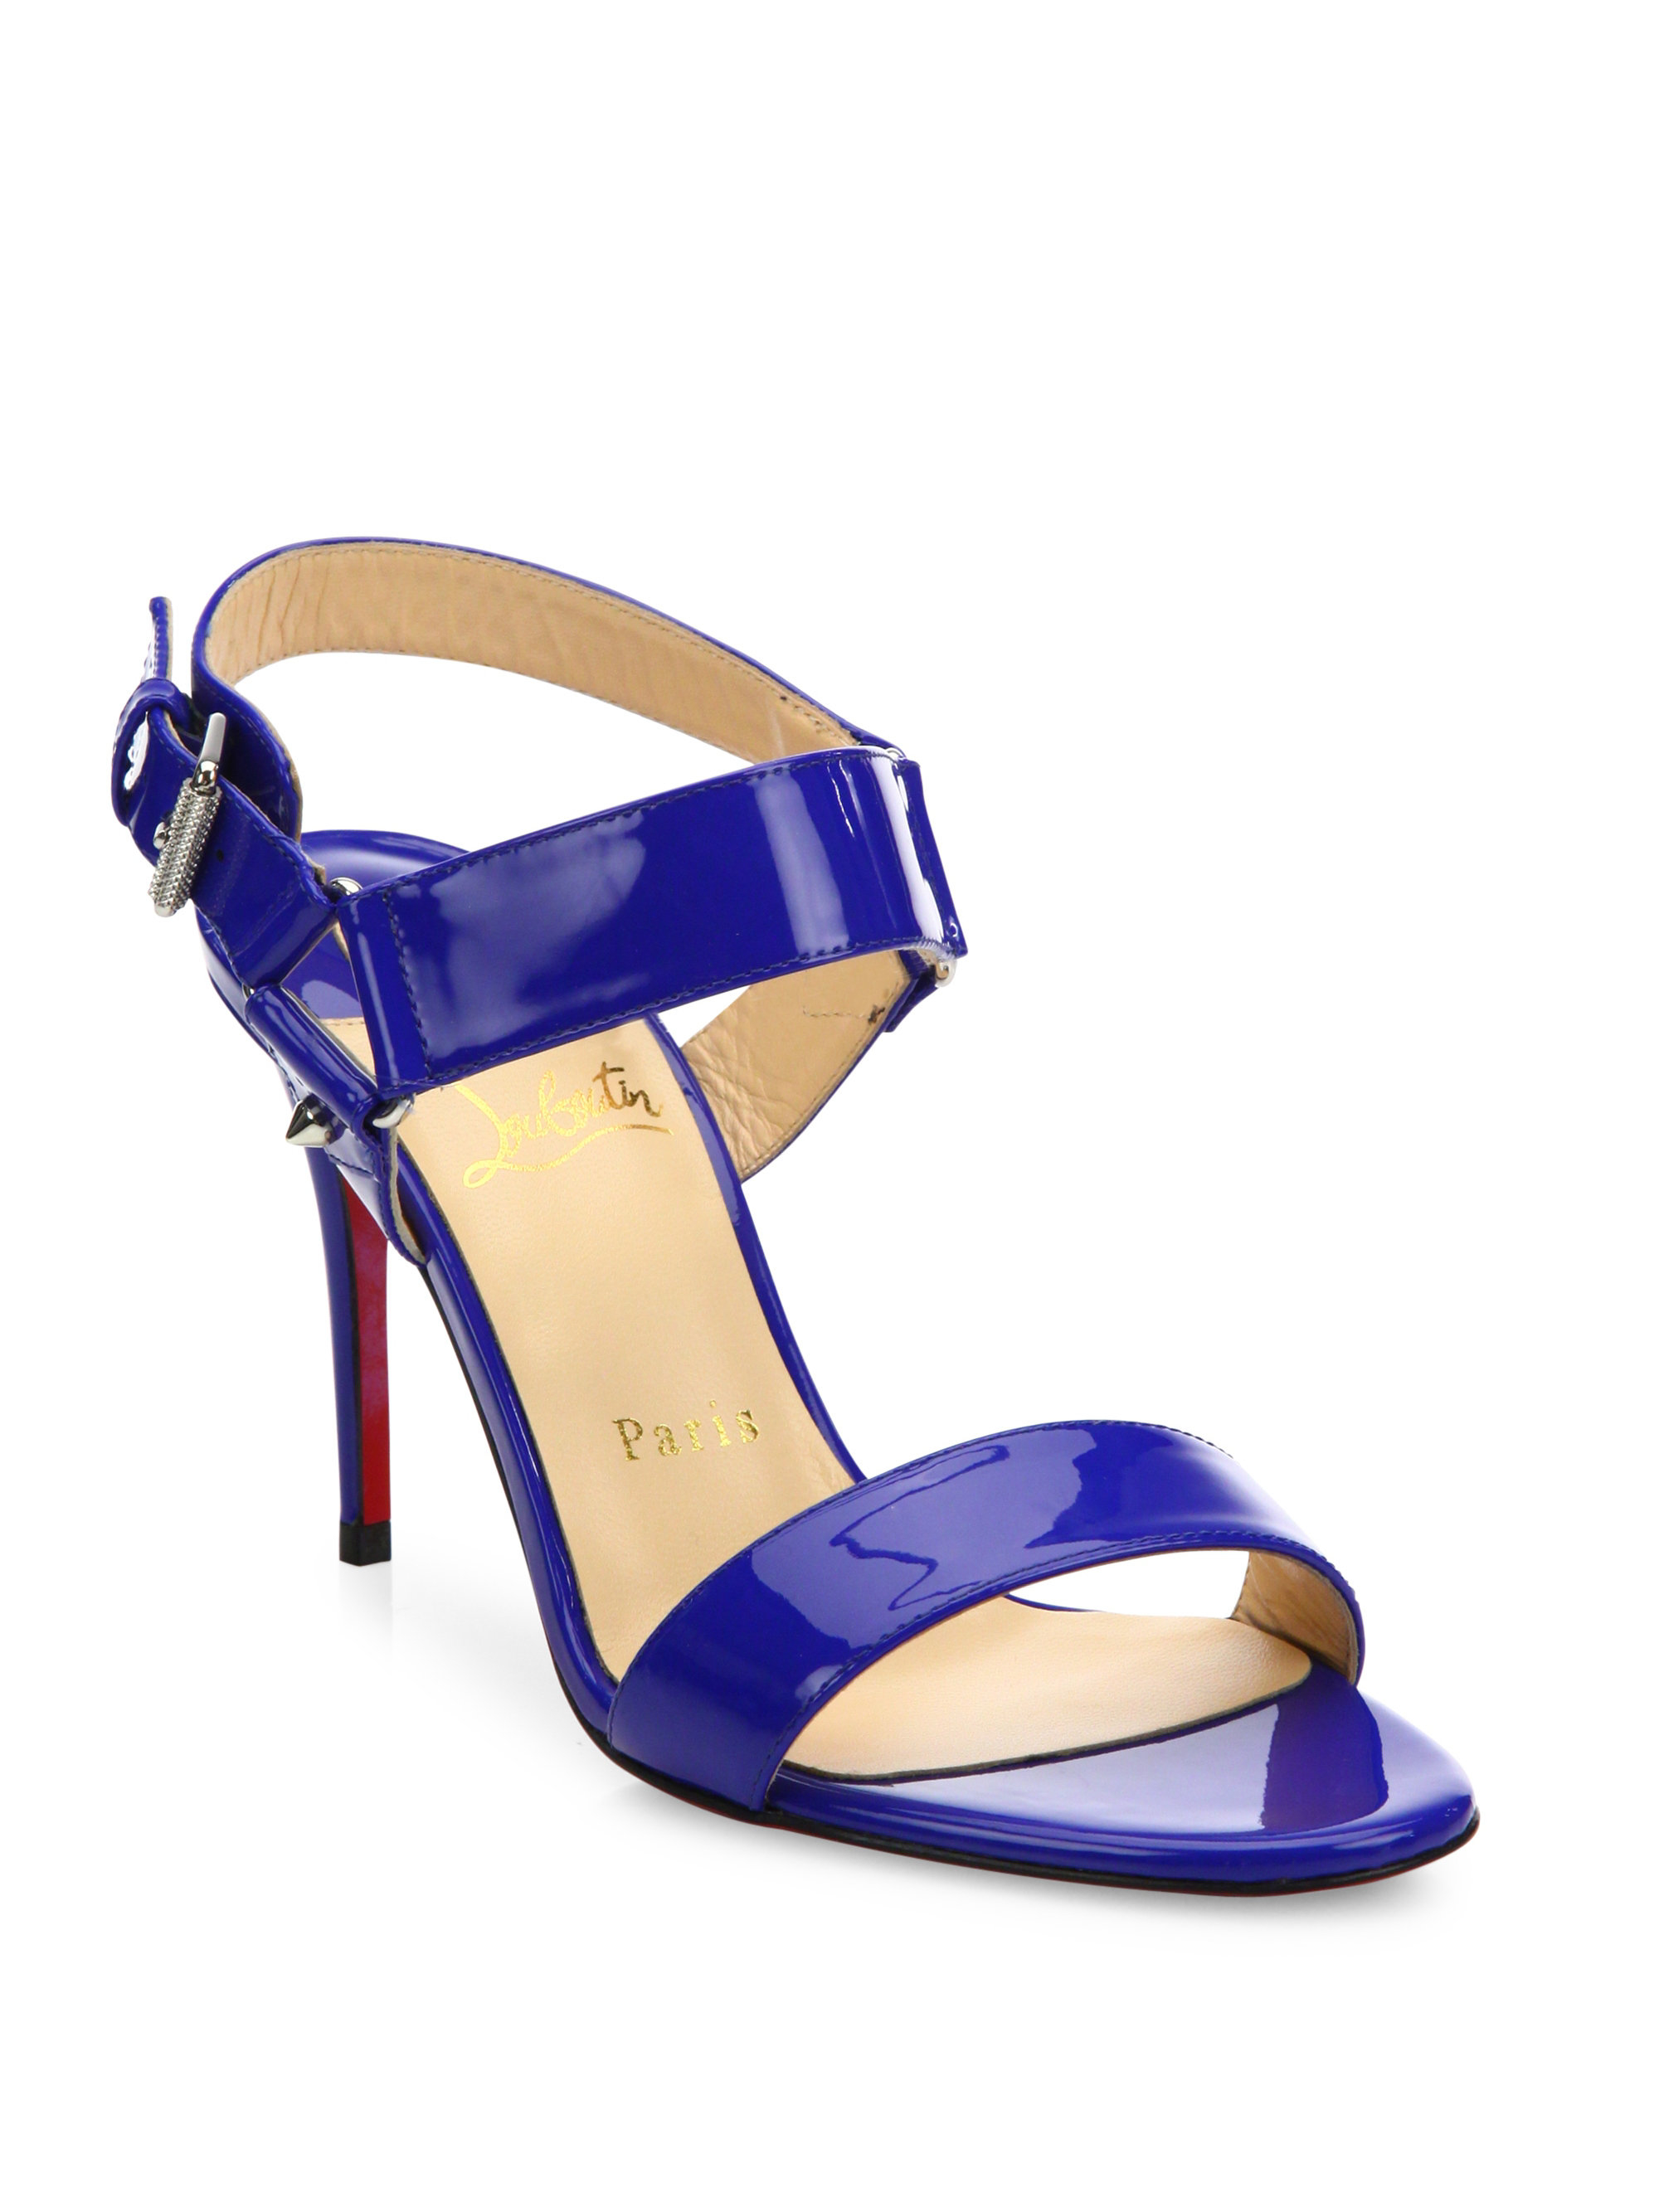 gyldige Pornografi melodisk Christian Louboutin Sova Patent Leather Sandals in Electric Blue (Blue) -  Lyst